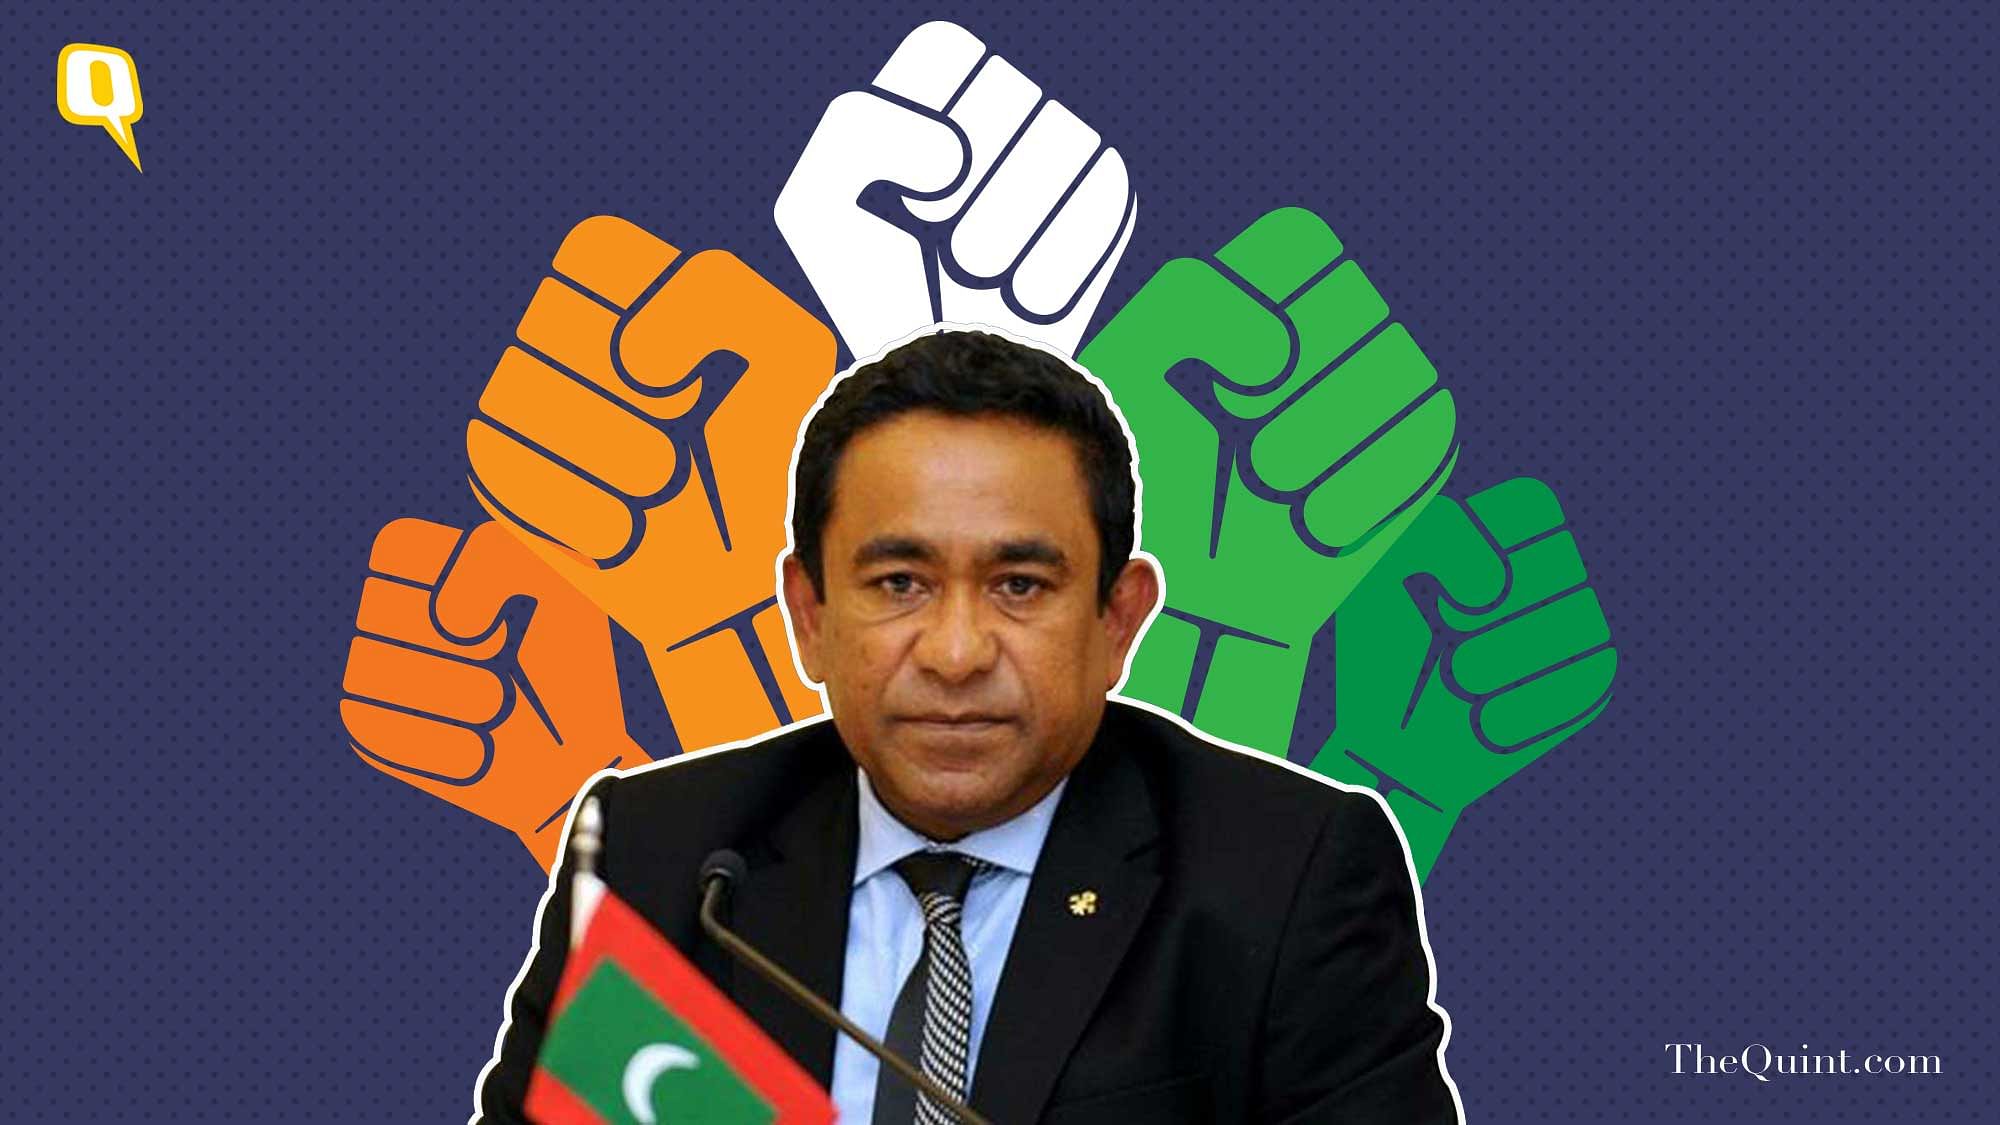 The unusual assertiveness shown by the Maldivian President forms part of a recent diplomatic pattern.&nbsp;